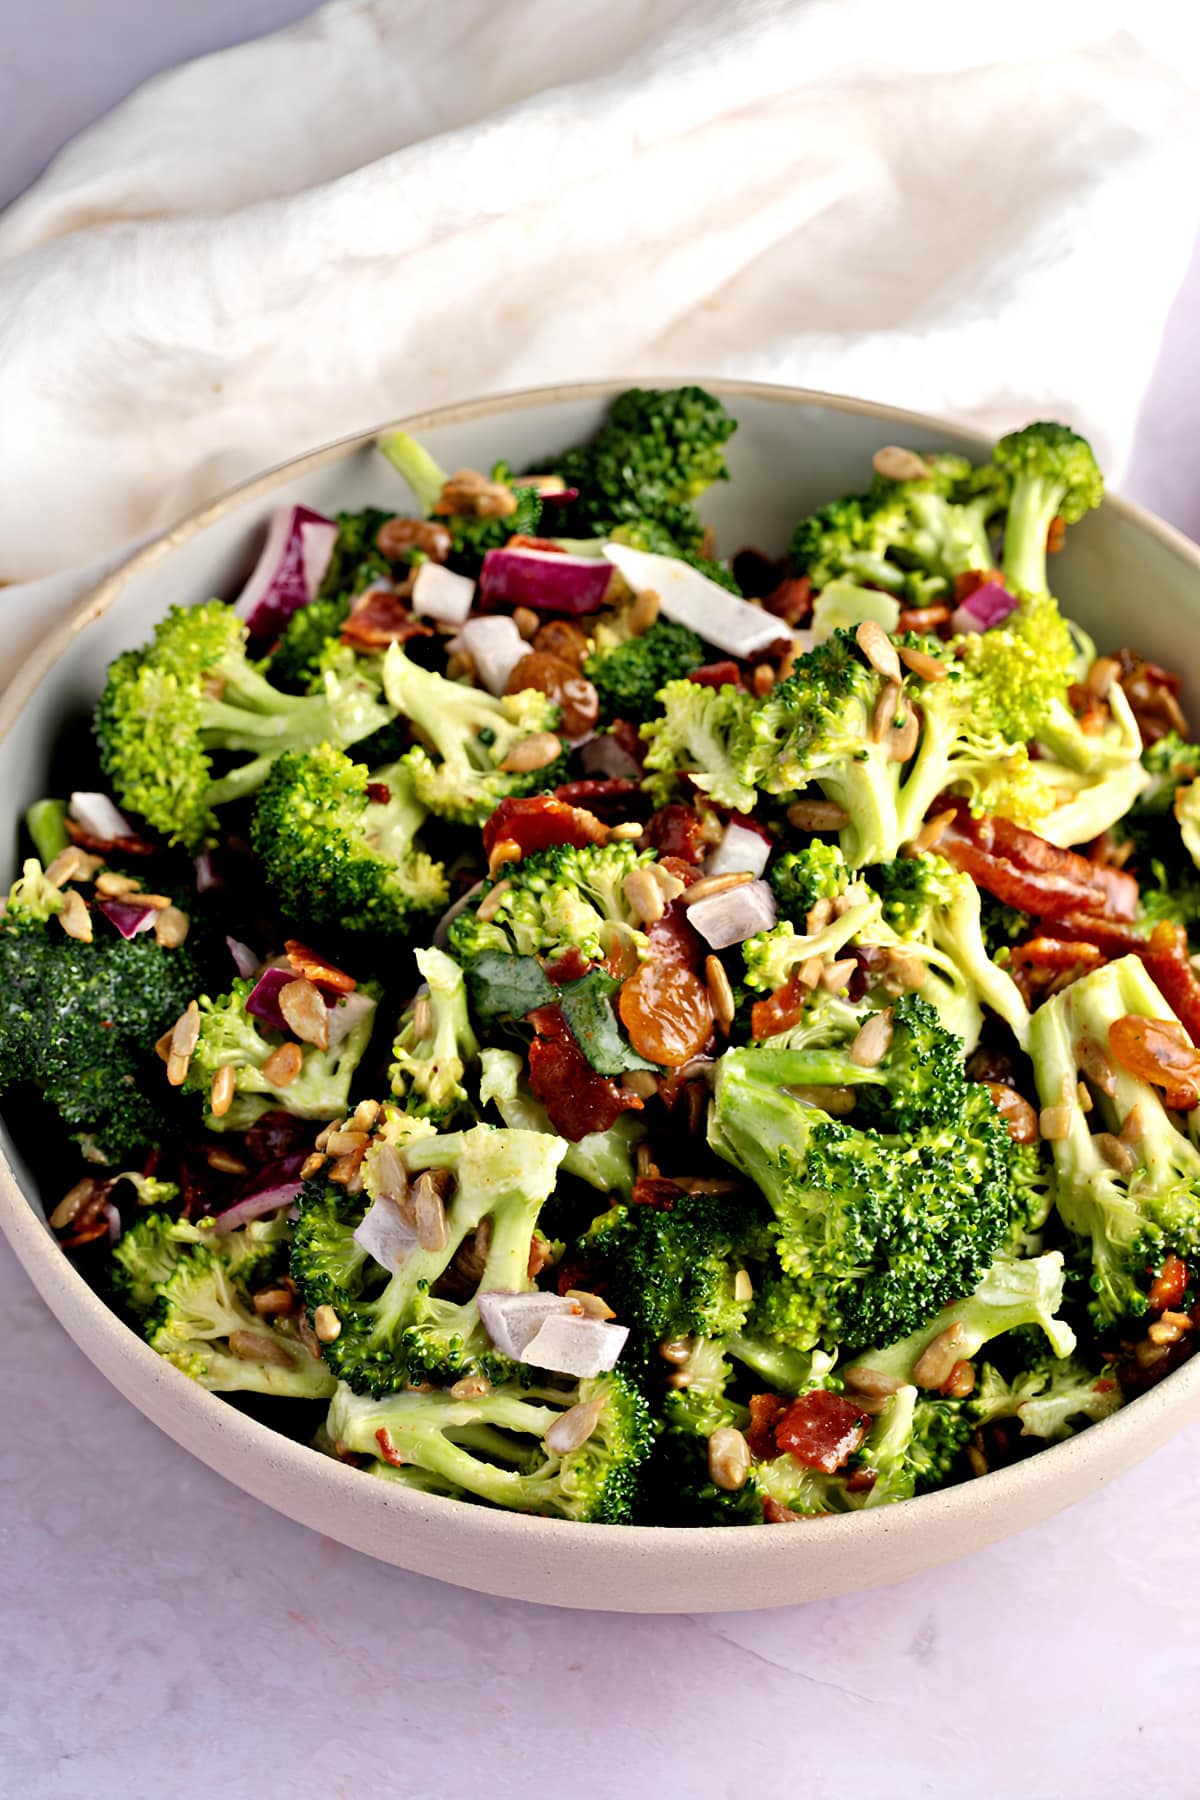 Bowl of broccoli salad with crumbled bacon, raisins, red onions and sunflower seed nuts.